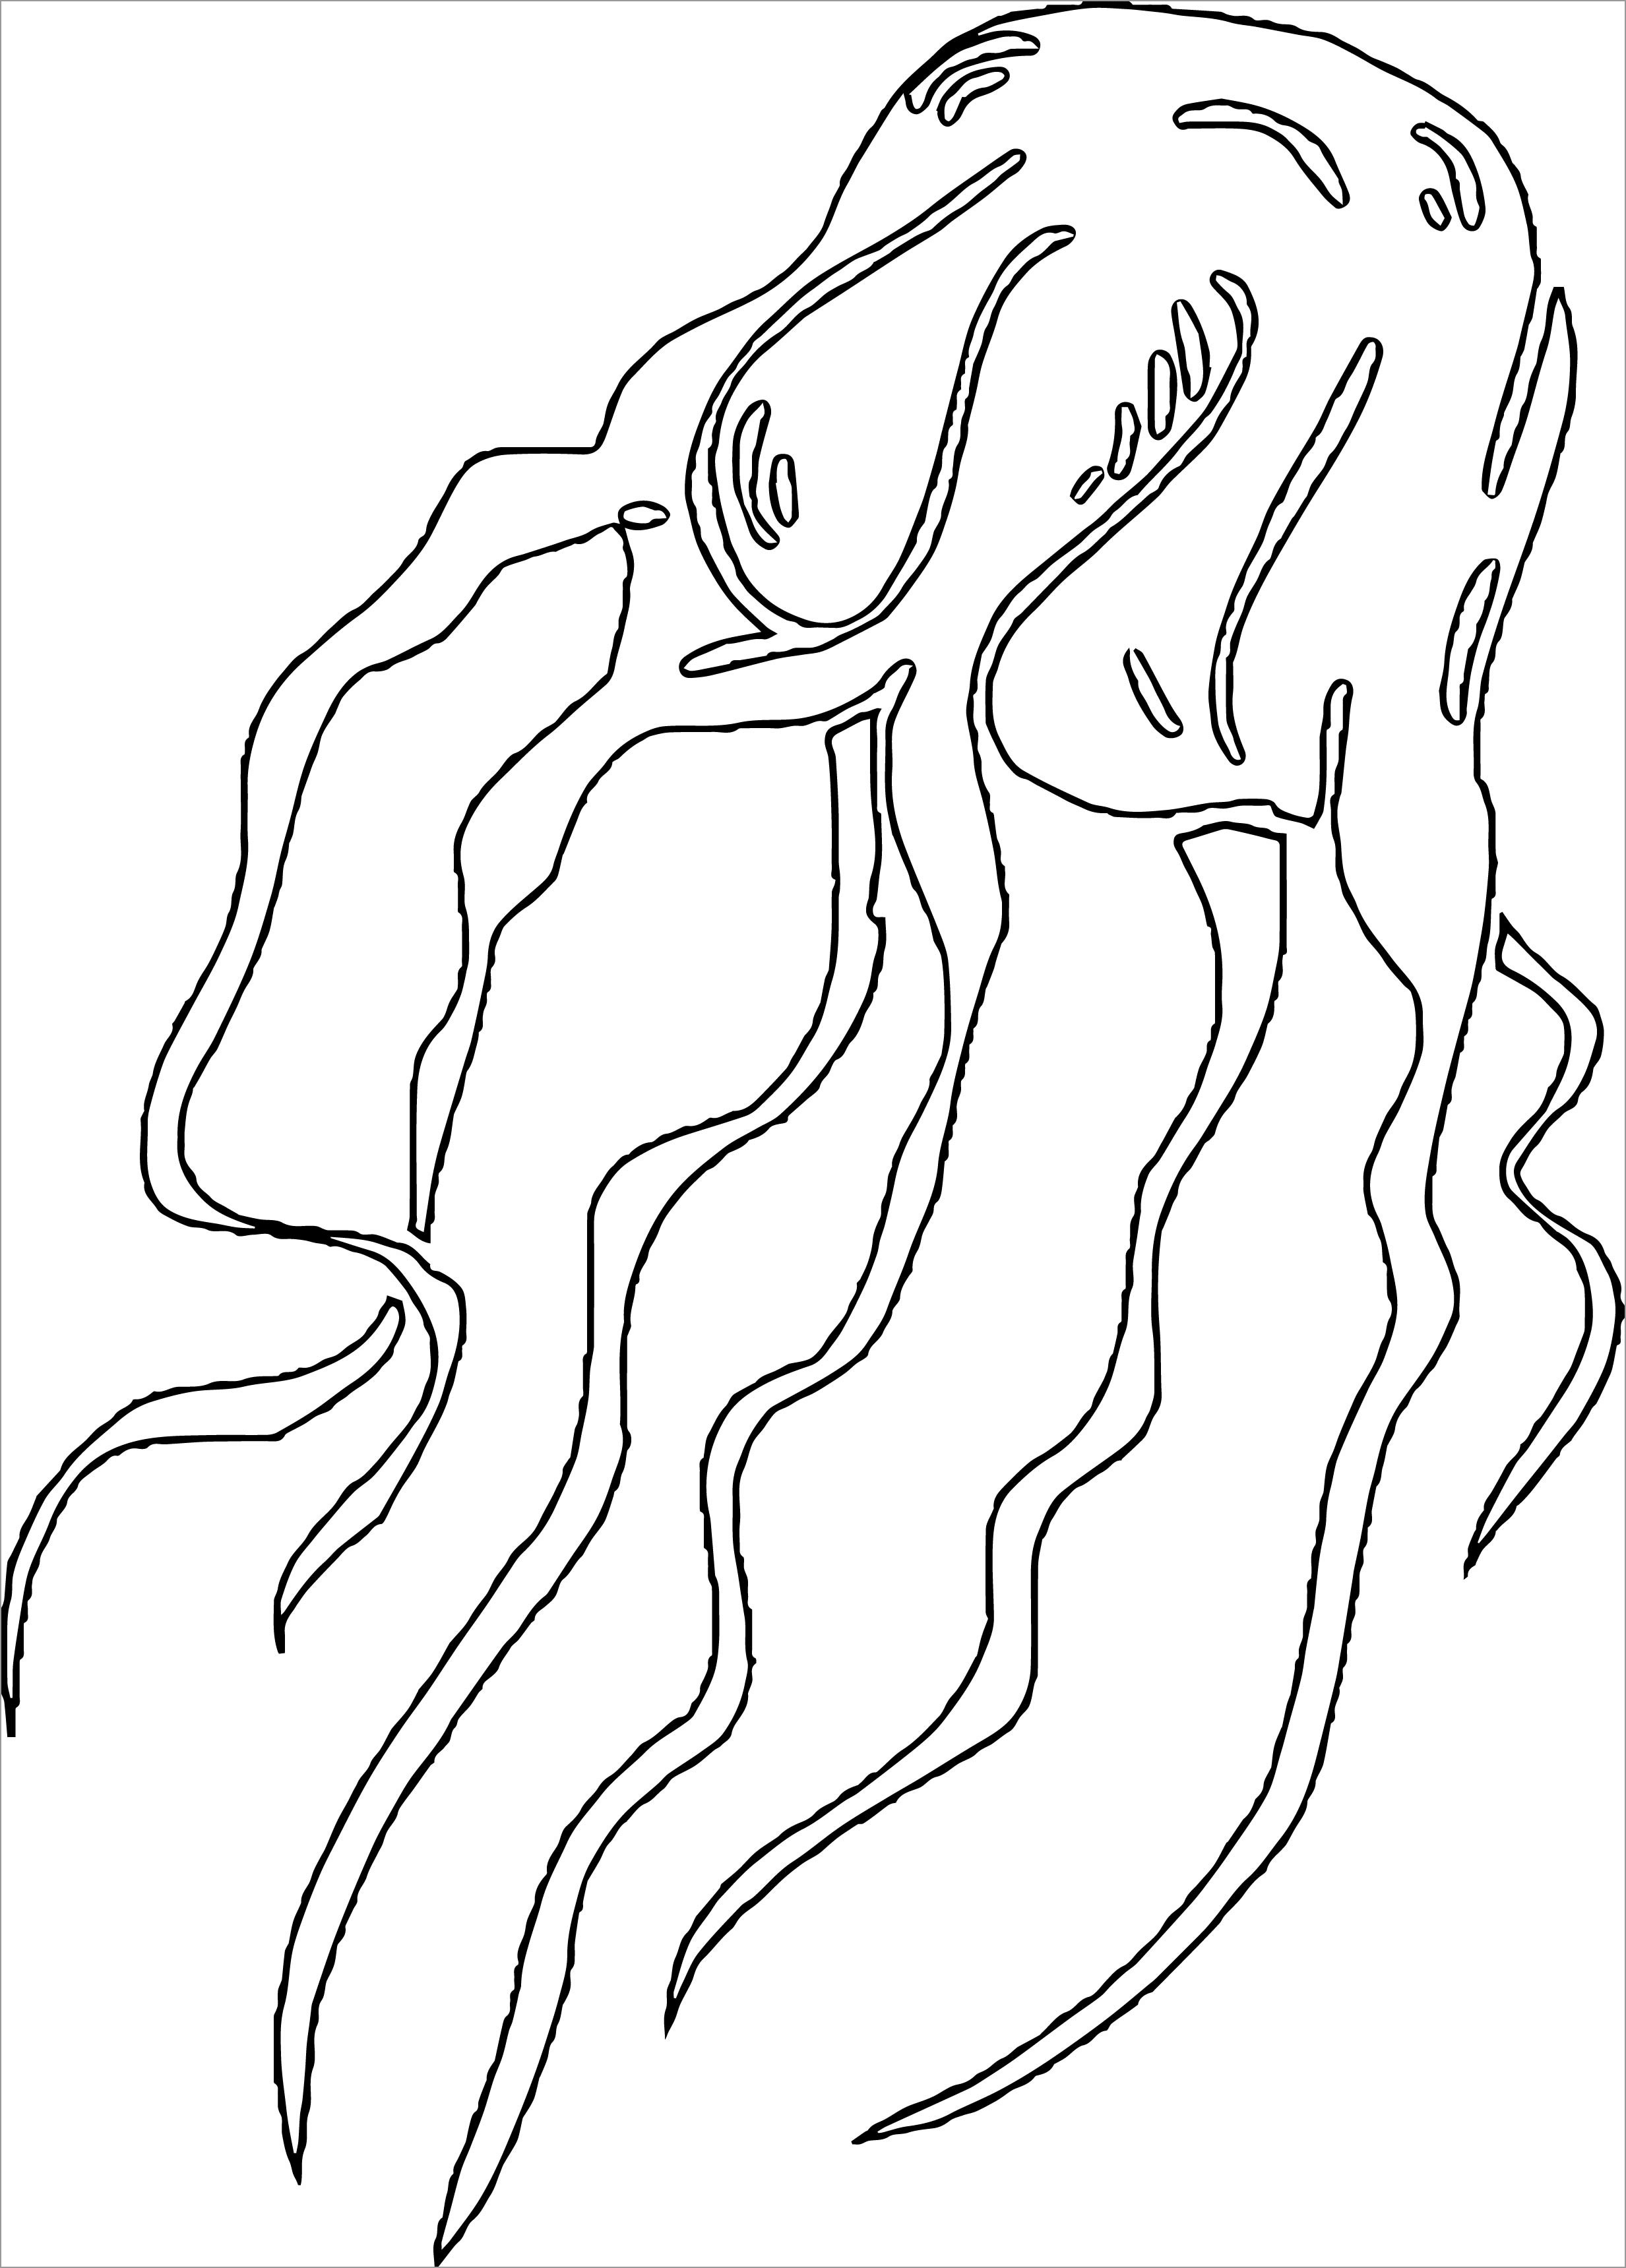 Jellyfish Coloring Pages ColoringBay